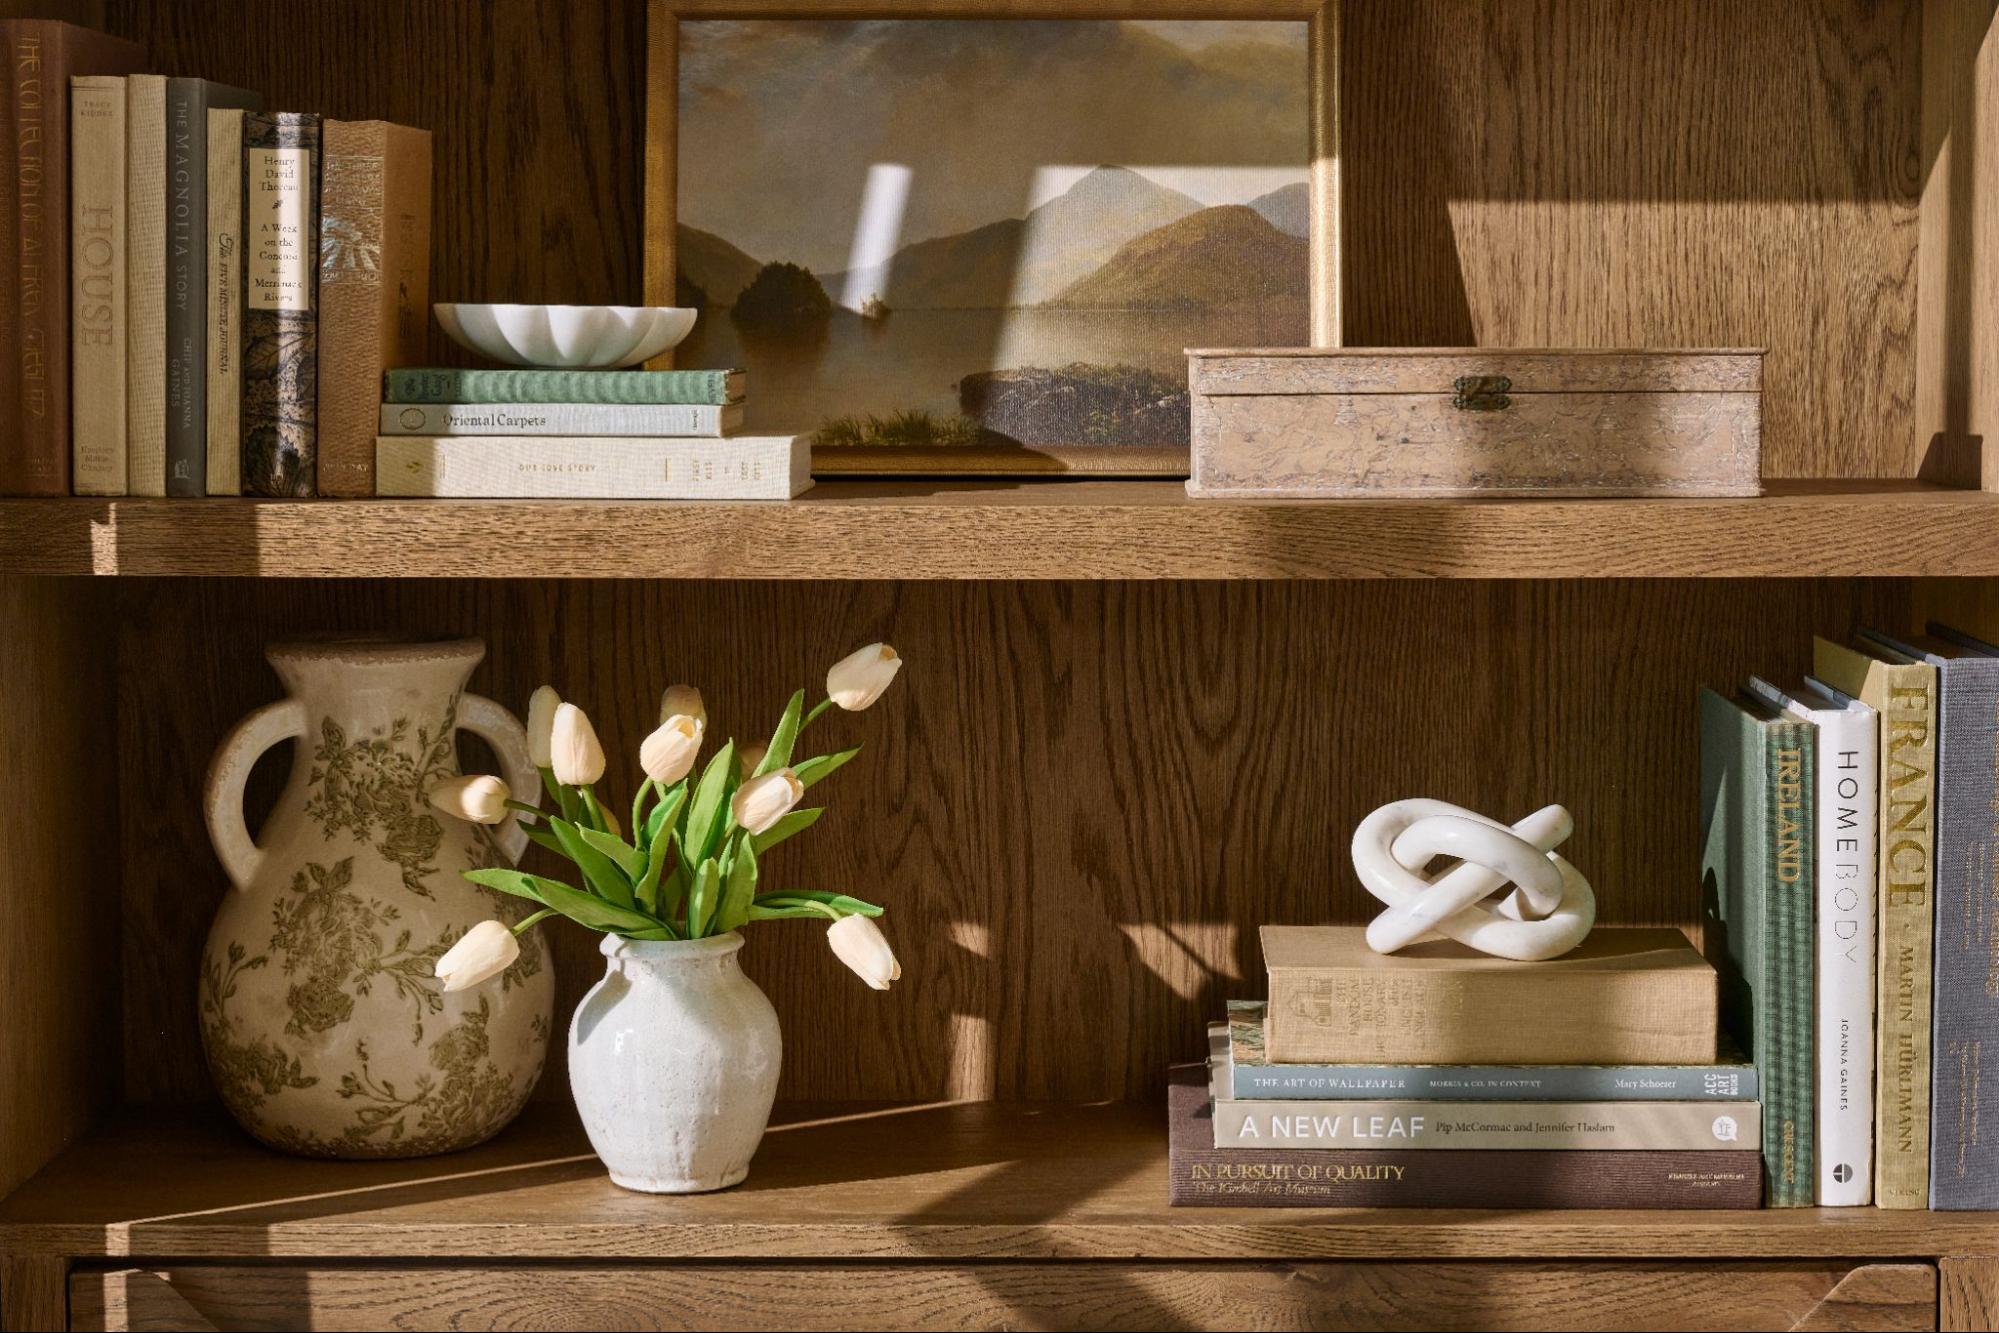 A wooden shelf is filled with accents and decor.